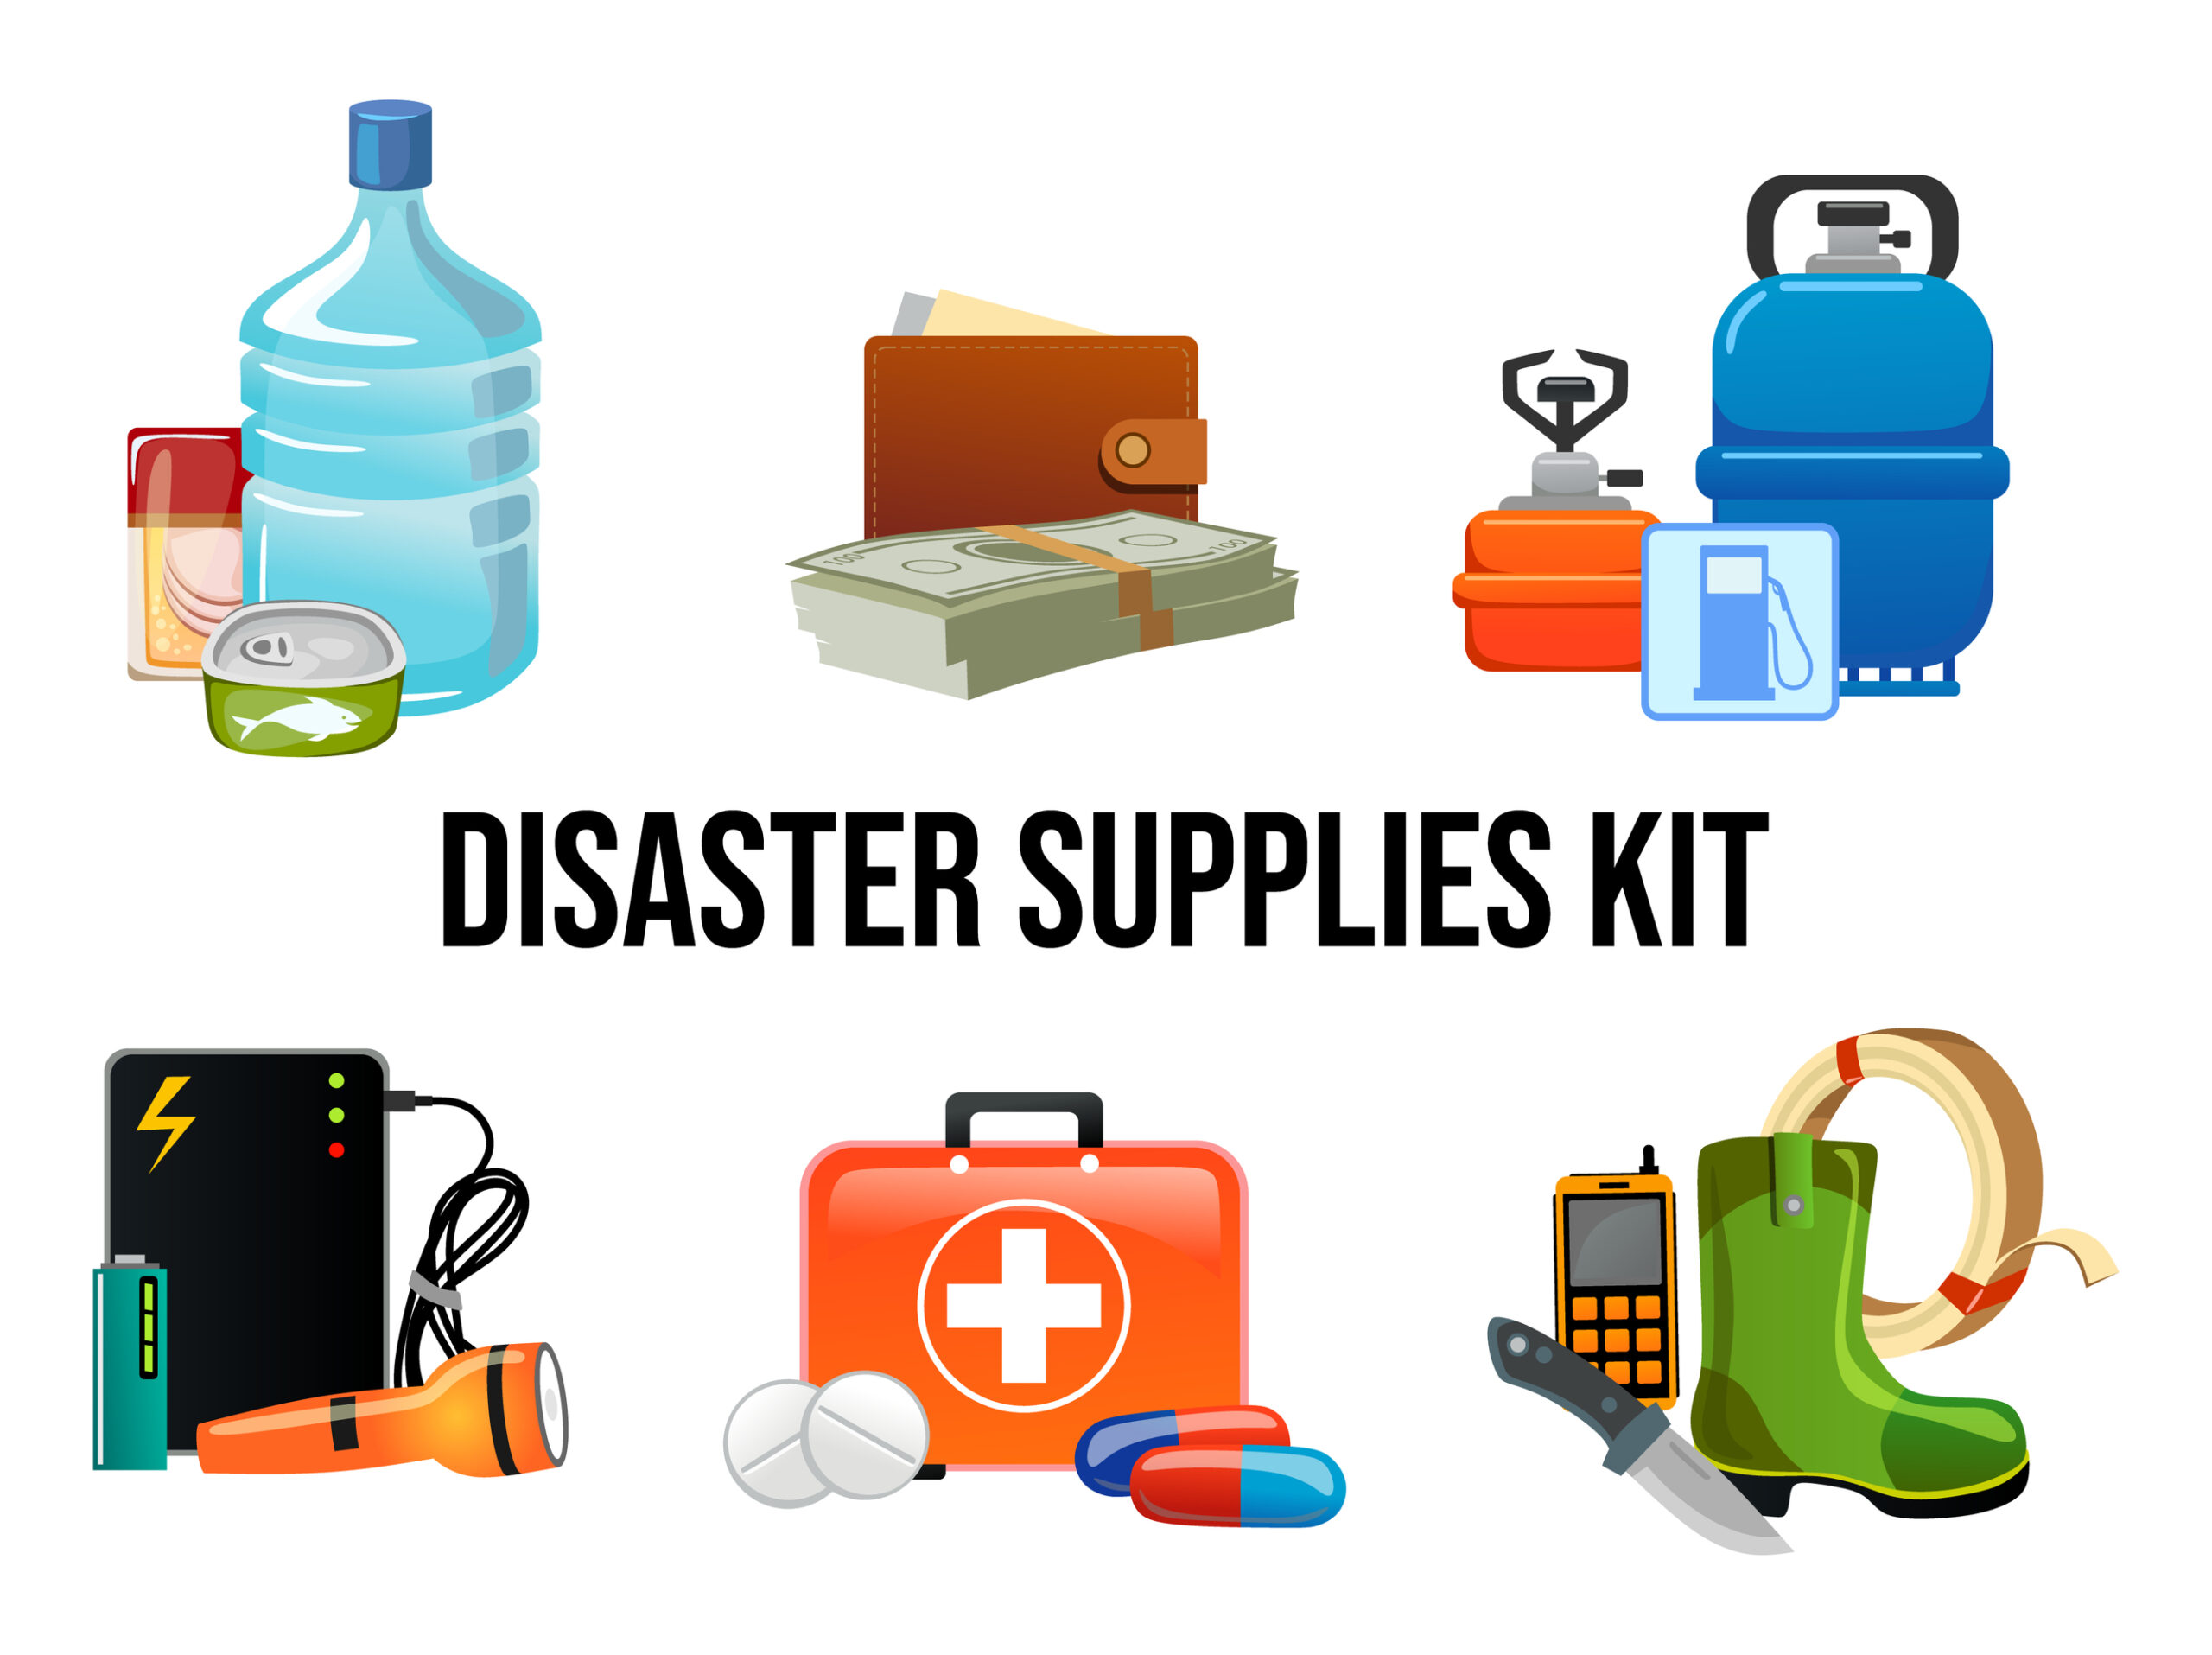 Make Sure You Have These Things in Your Disaster Supplies Kit - Baton ...